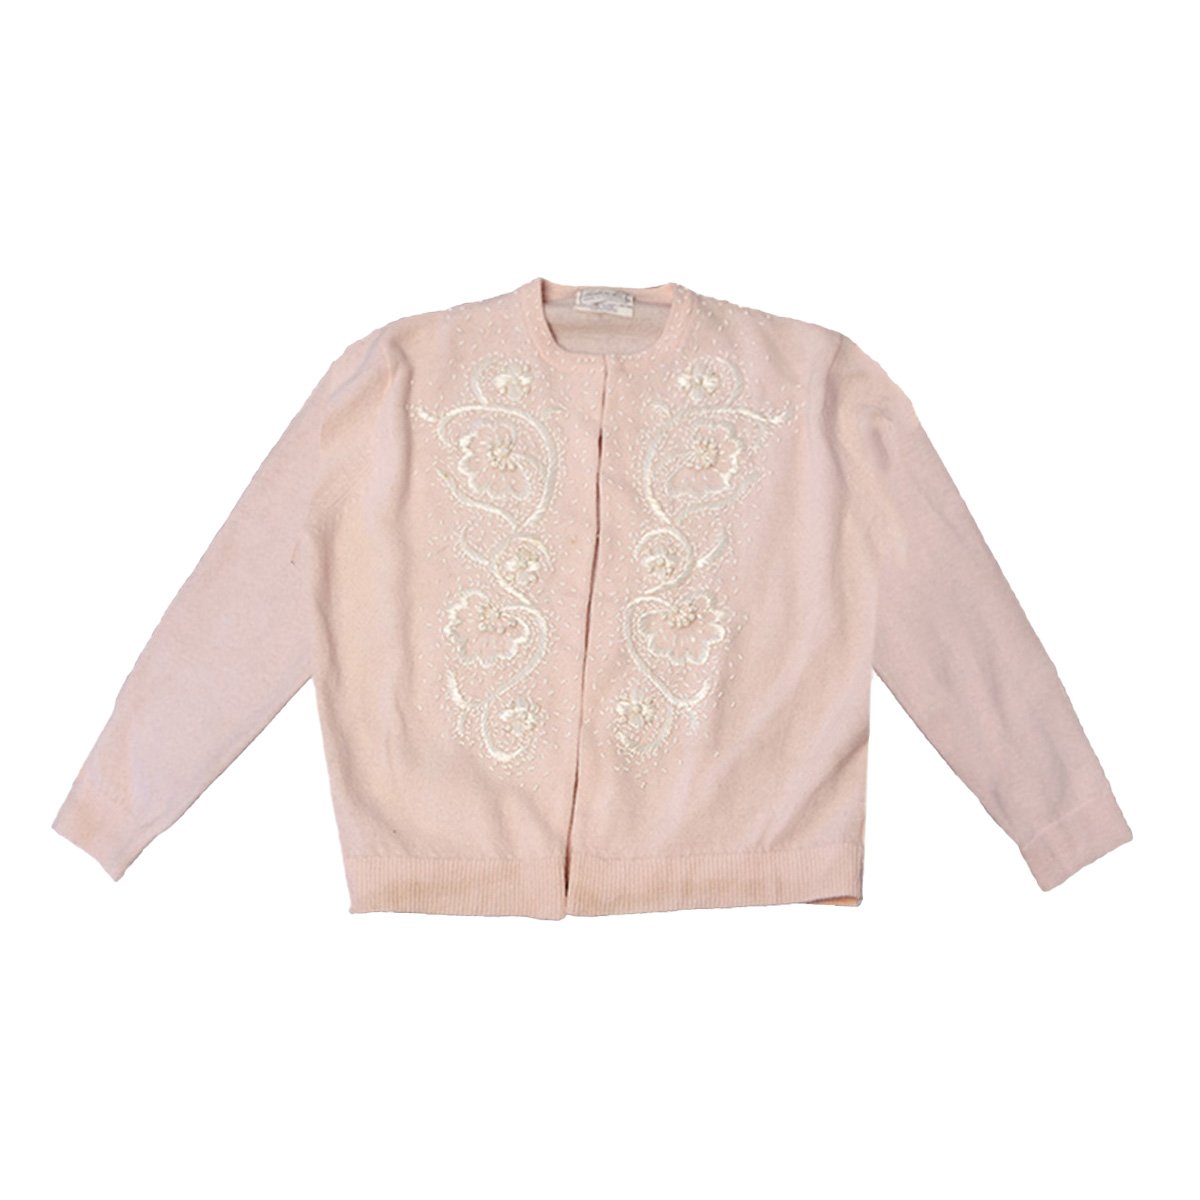 Vintage 60s Pink Cardigan Sweater, White Floral Embroidery